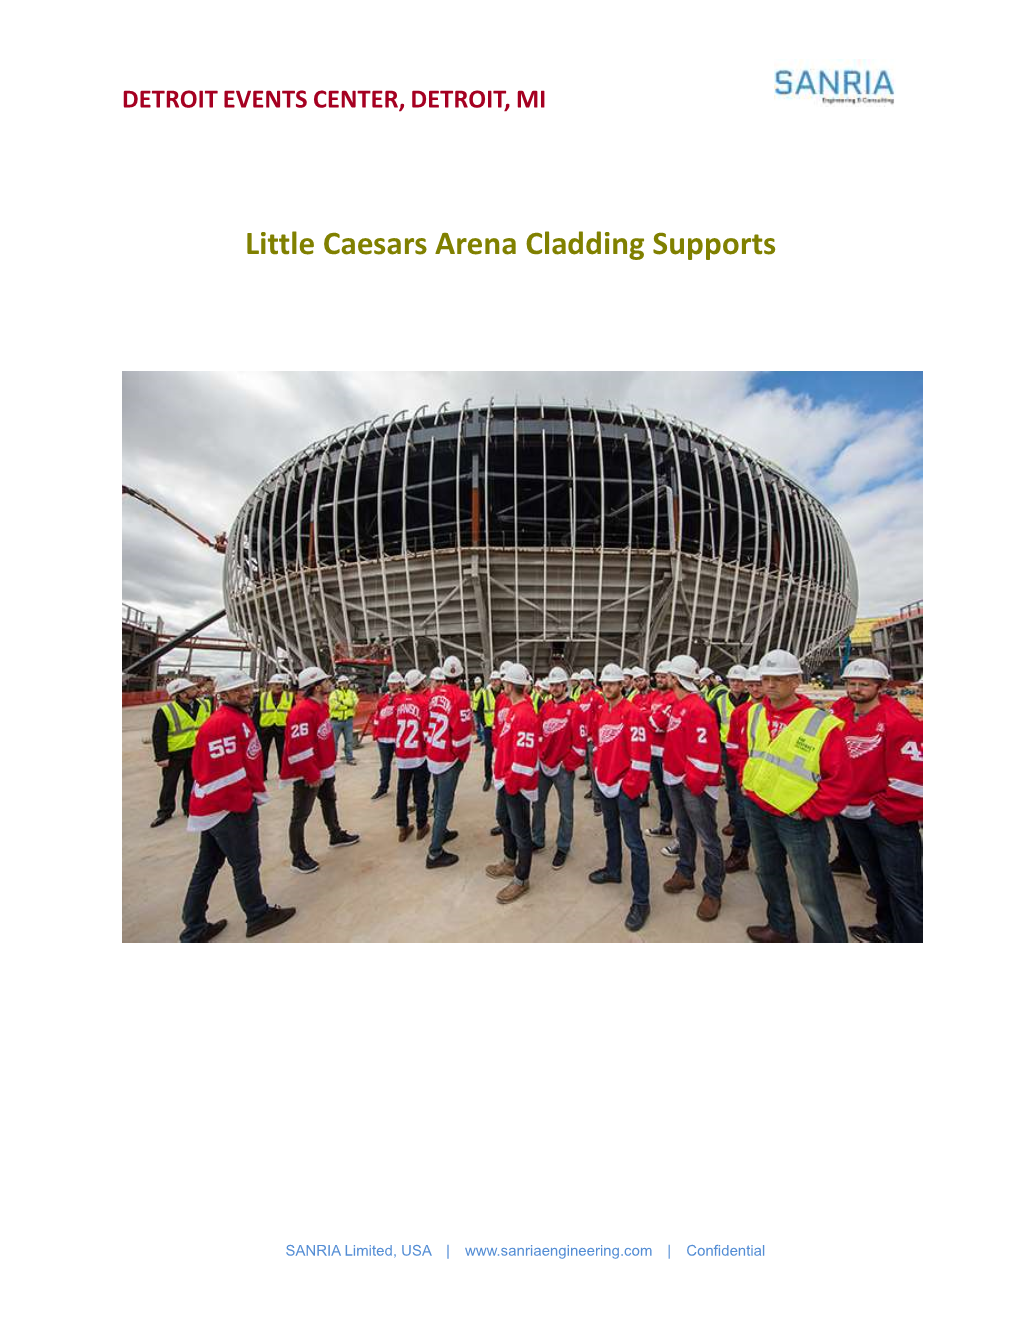 Little Caesars Arena Cladding Supports